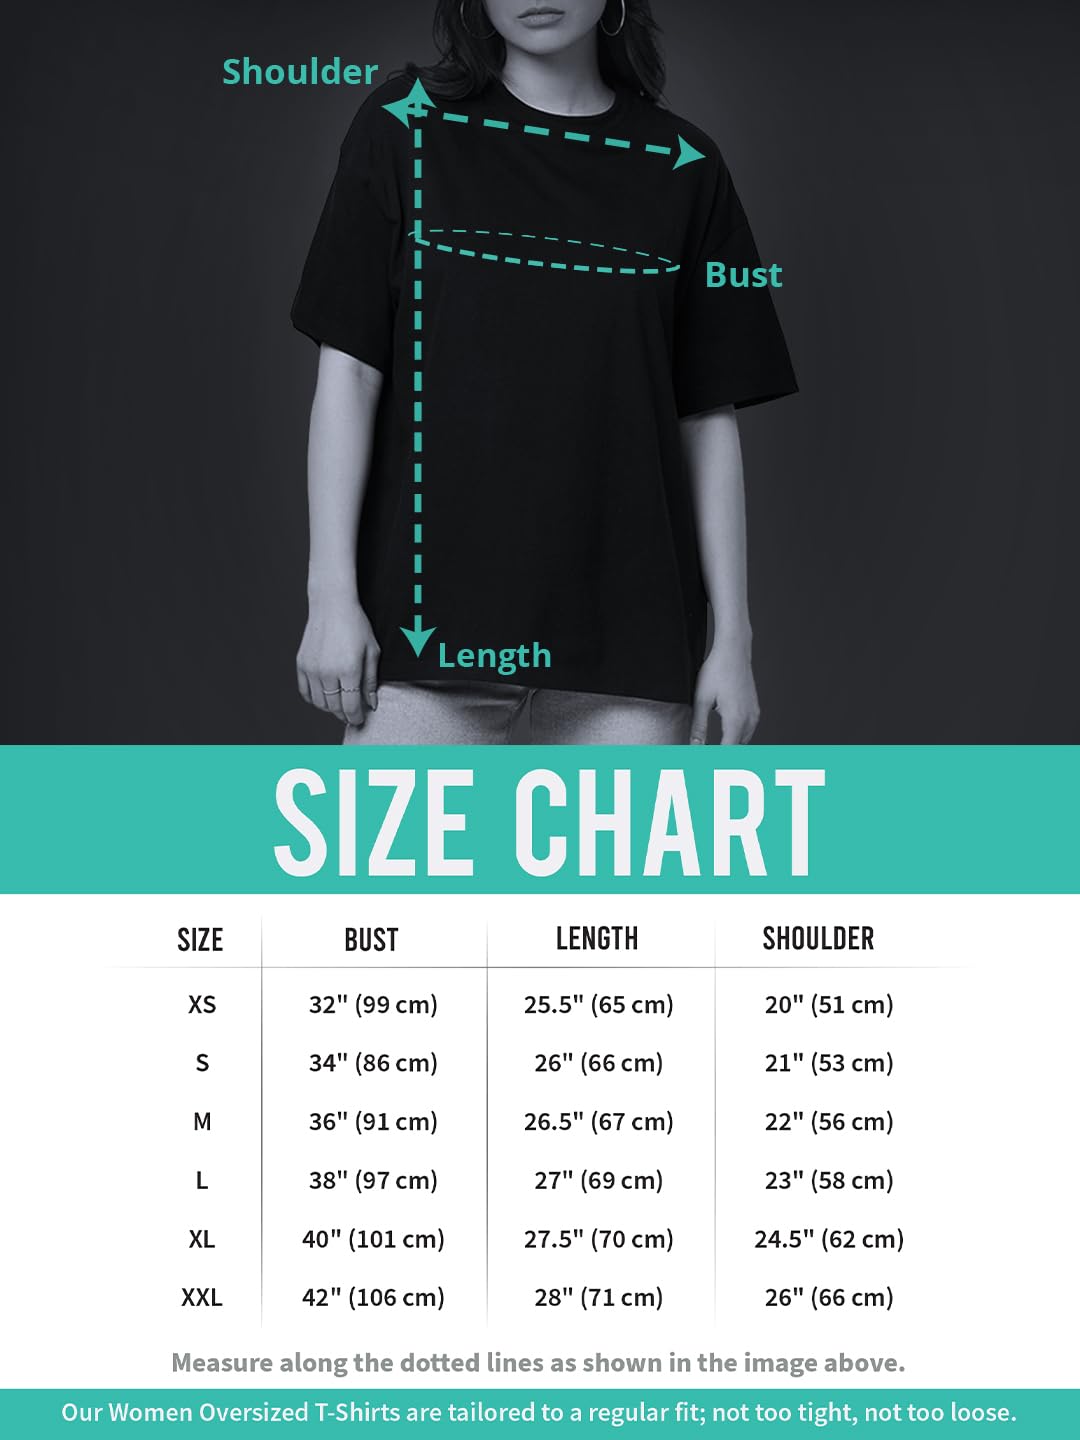 The Souled Store Take Me Home Women and Girls Oversize Fit Half Sleeves Graphic Printed Green Color Cotton T-Shirt